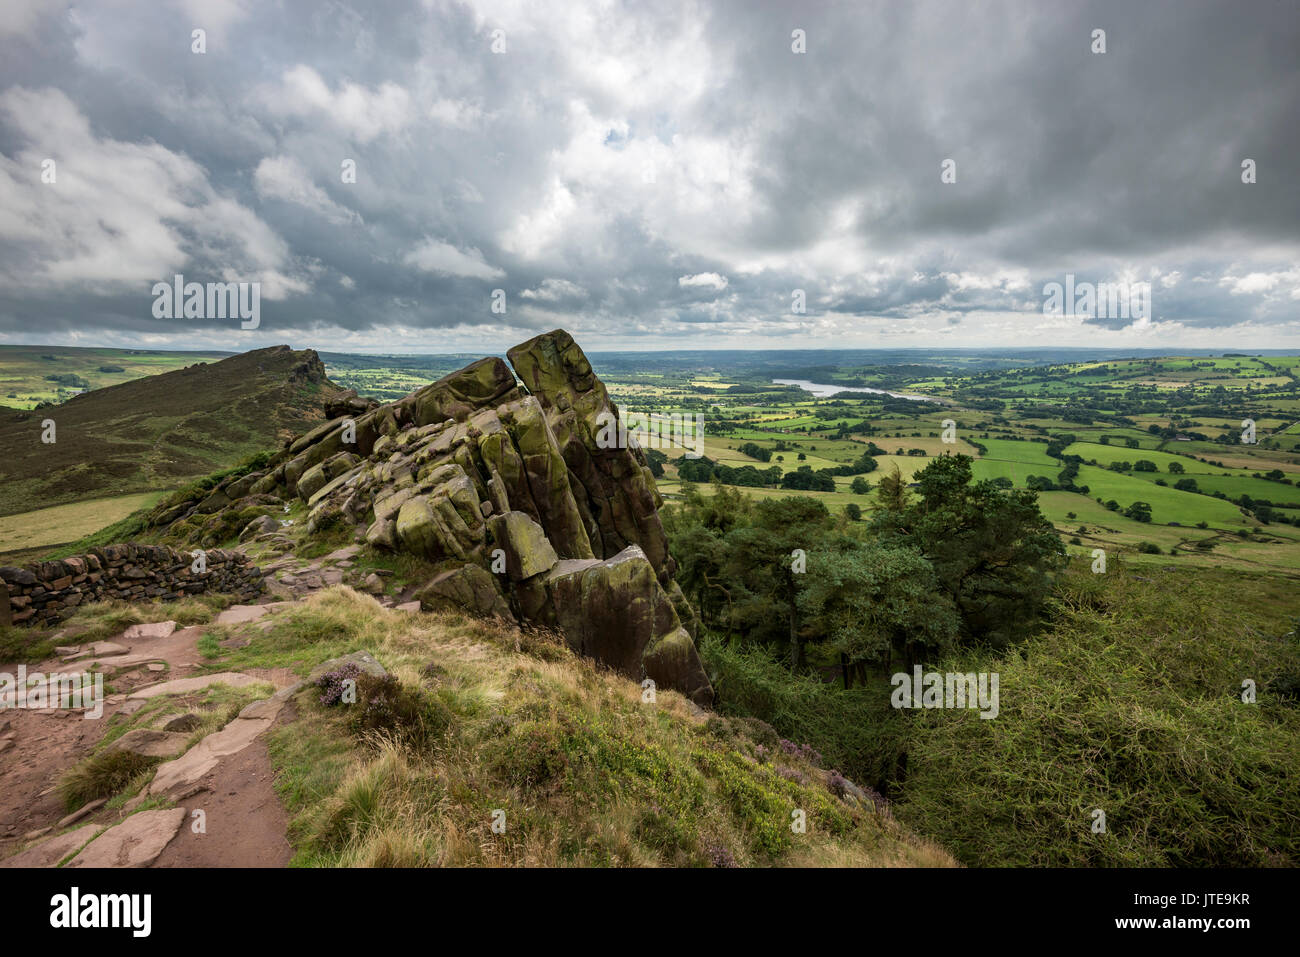 Dramatic landscape at The Roaches in the Peak District. Gritstone escarpment with far reaching views over the Staffordshire countryside. Stock Photo